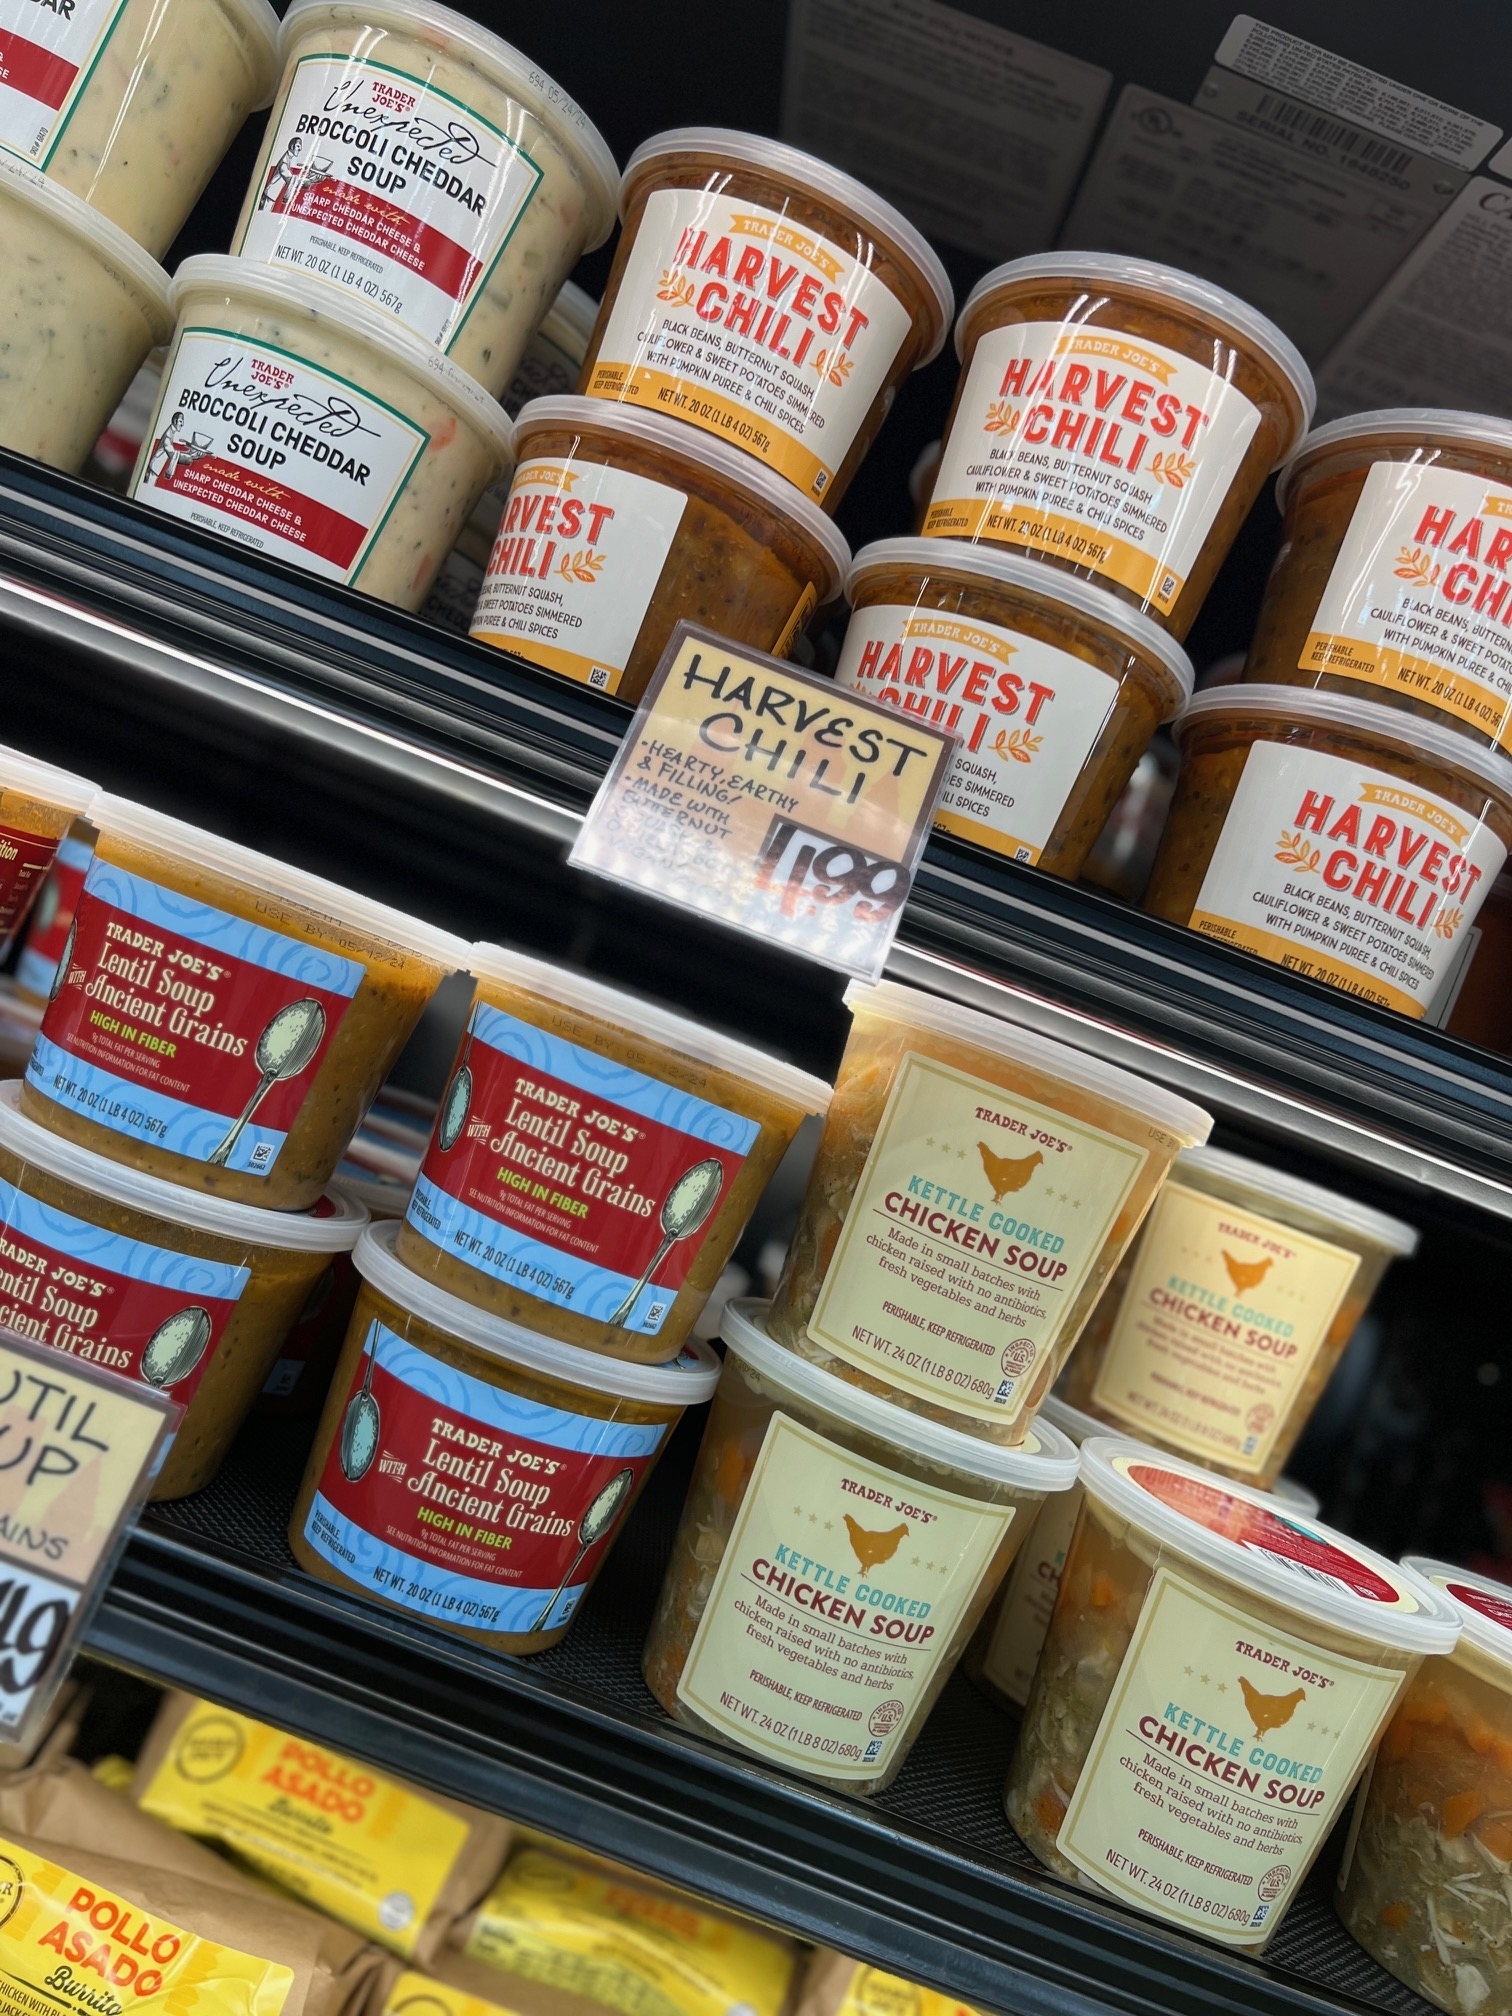 Assorted pre-packaged soups on grocery shelves, including chicken soup and harvest chili